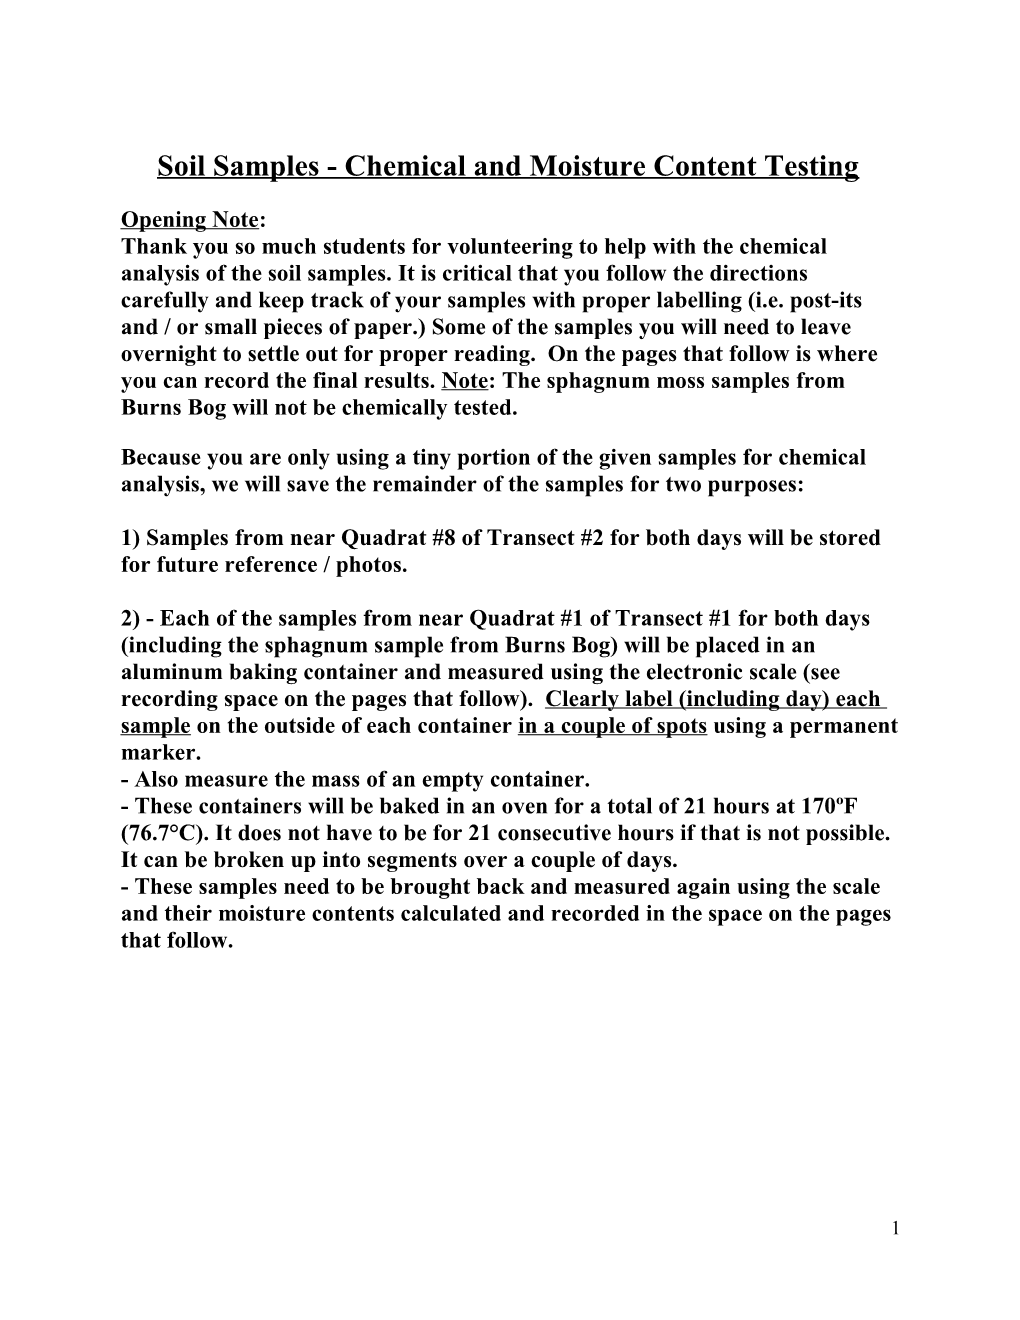 Soil Samples - Chemical and Moisture Content Testing